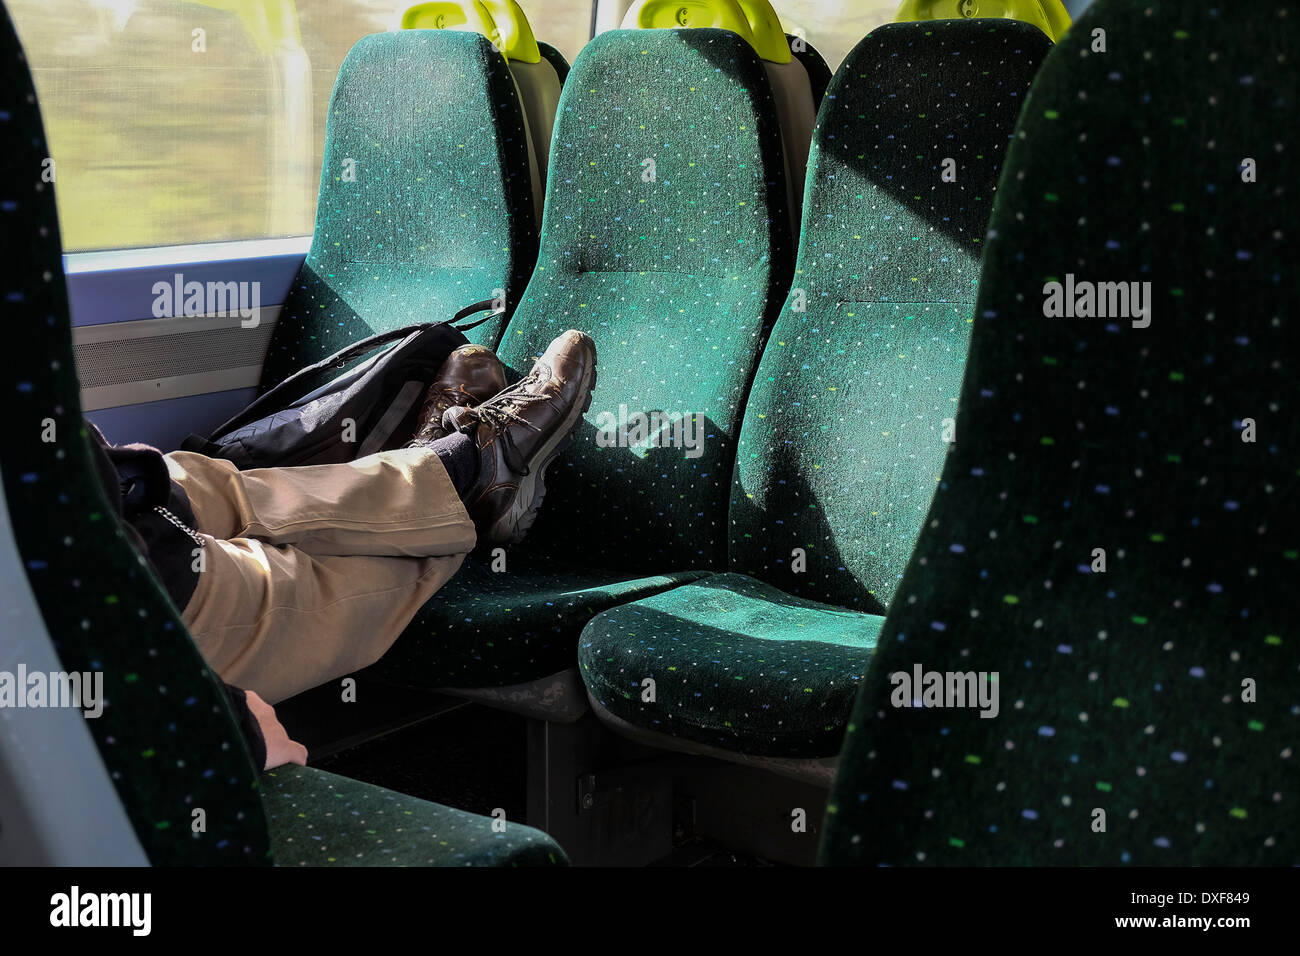 A man with his feet on seats on a train. Stock Photo